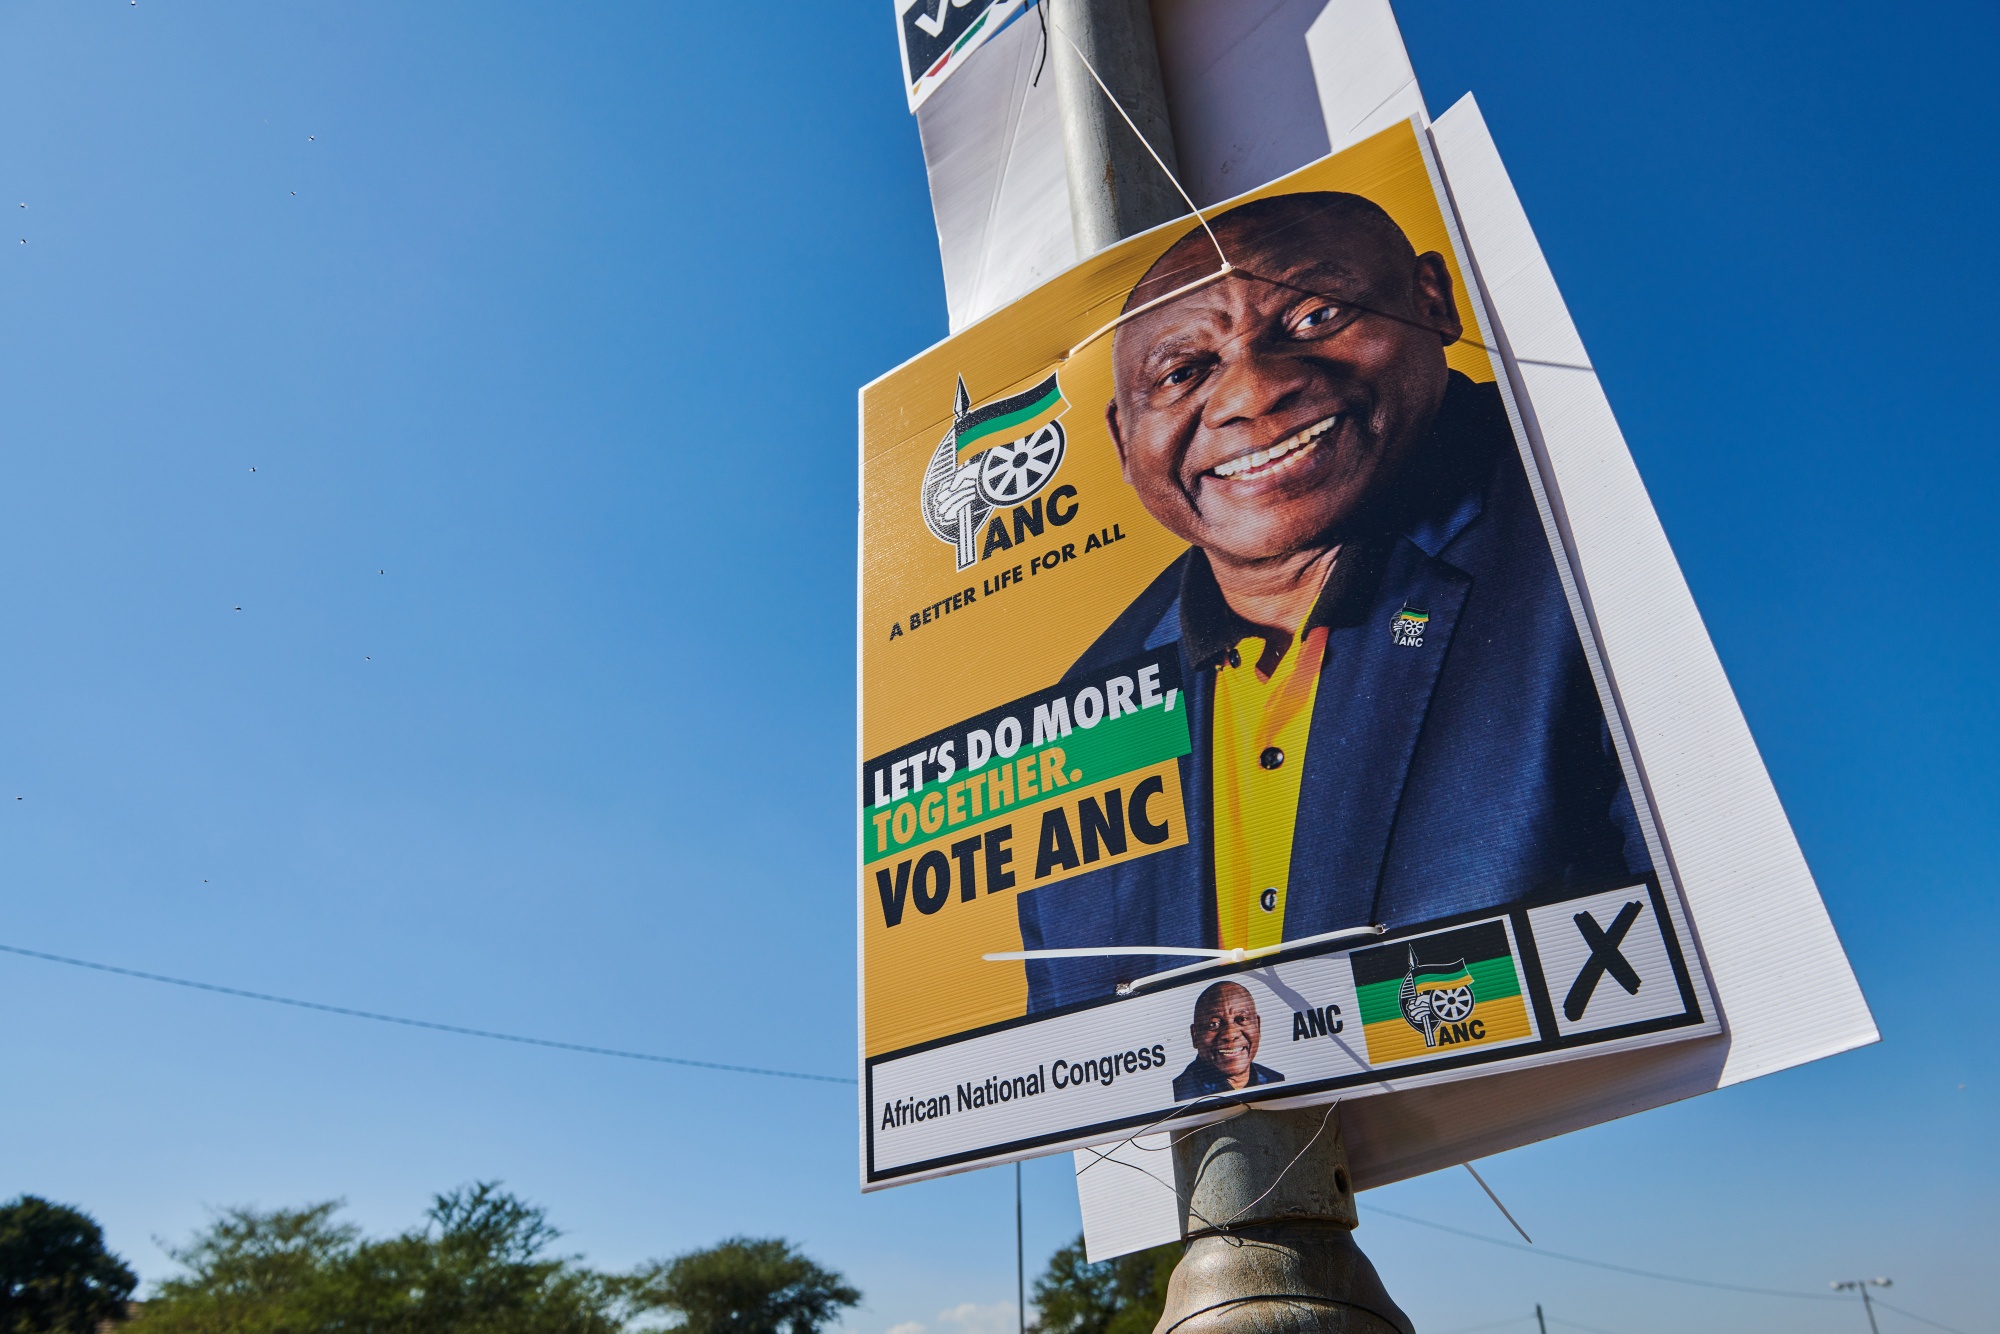 An election poster for the ANC's Cyril Ramaphosa in Pretoria, South Africa.